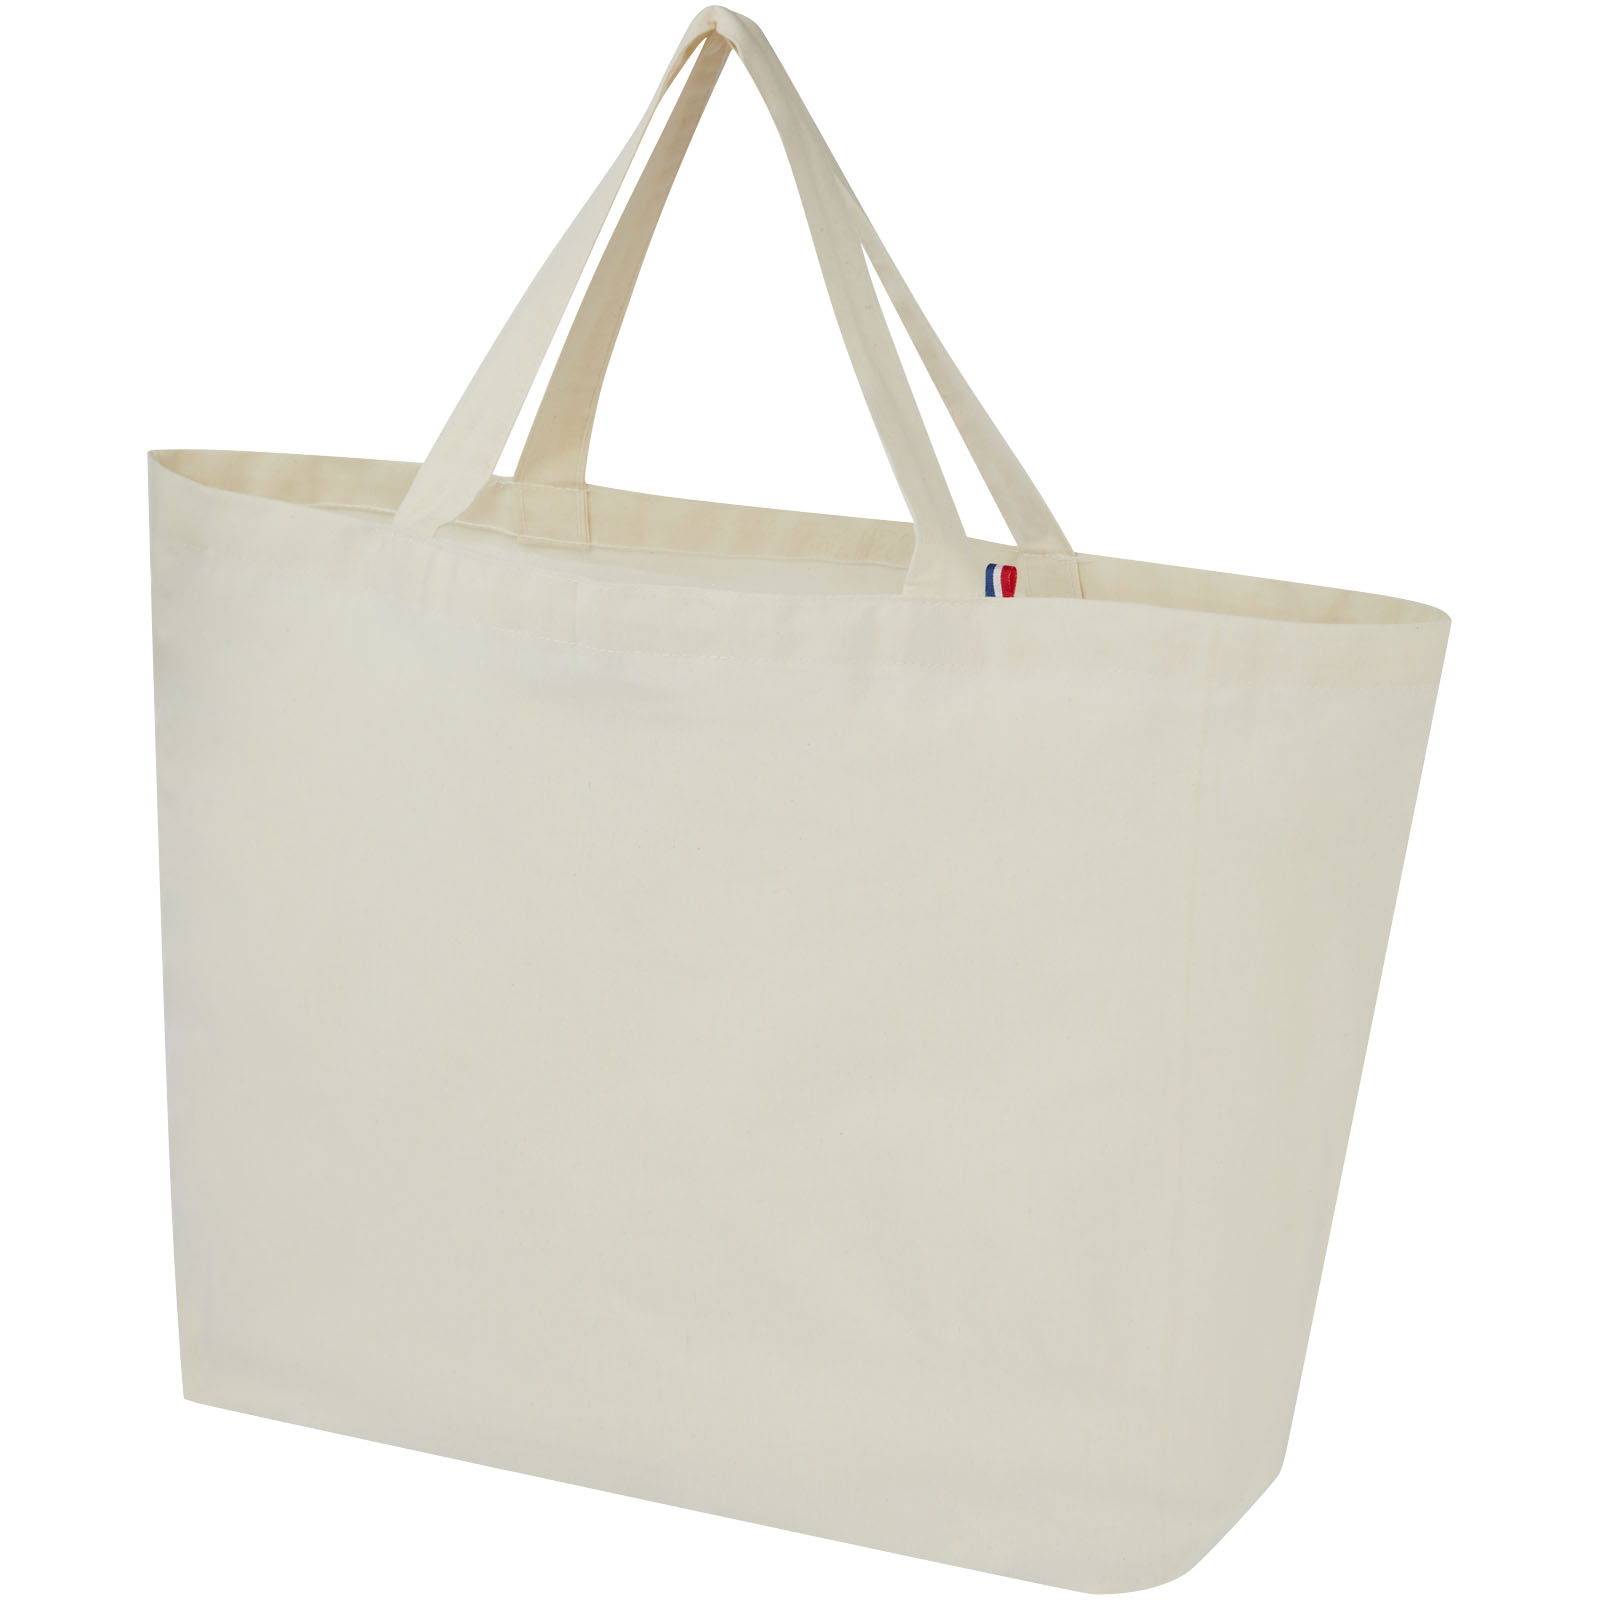 Advertising Shopping & Tote Bags - Cannes 200 g/m2 recycled shopper tote bag 10L - 0